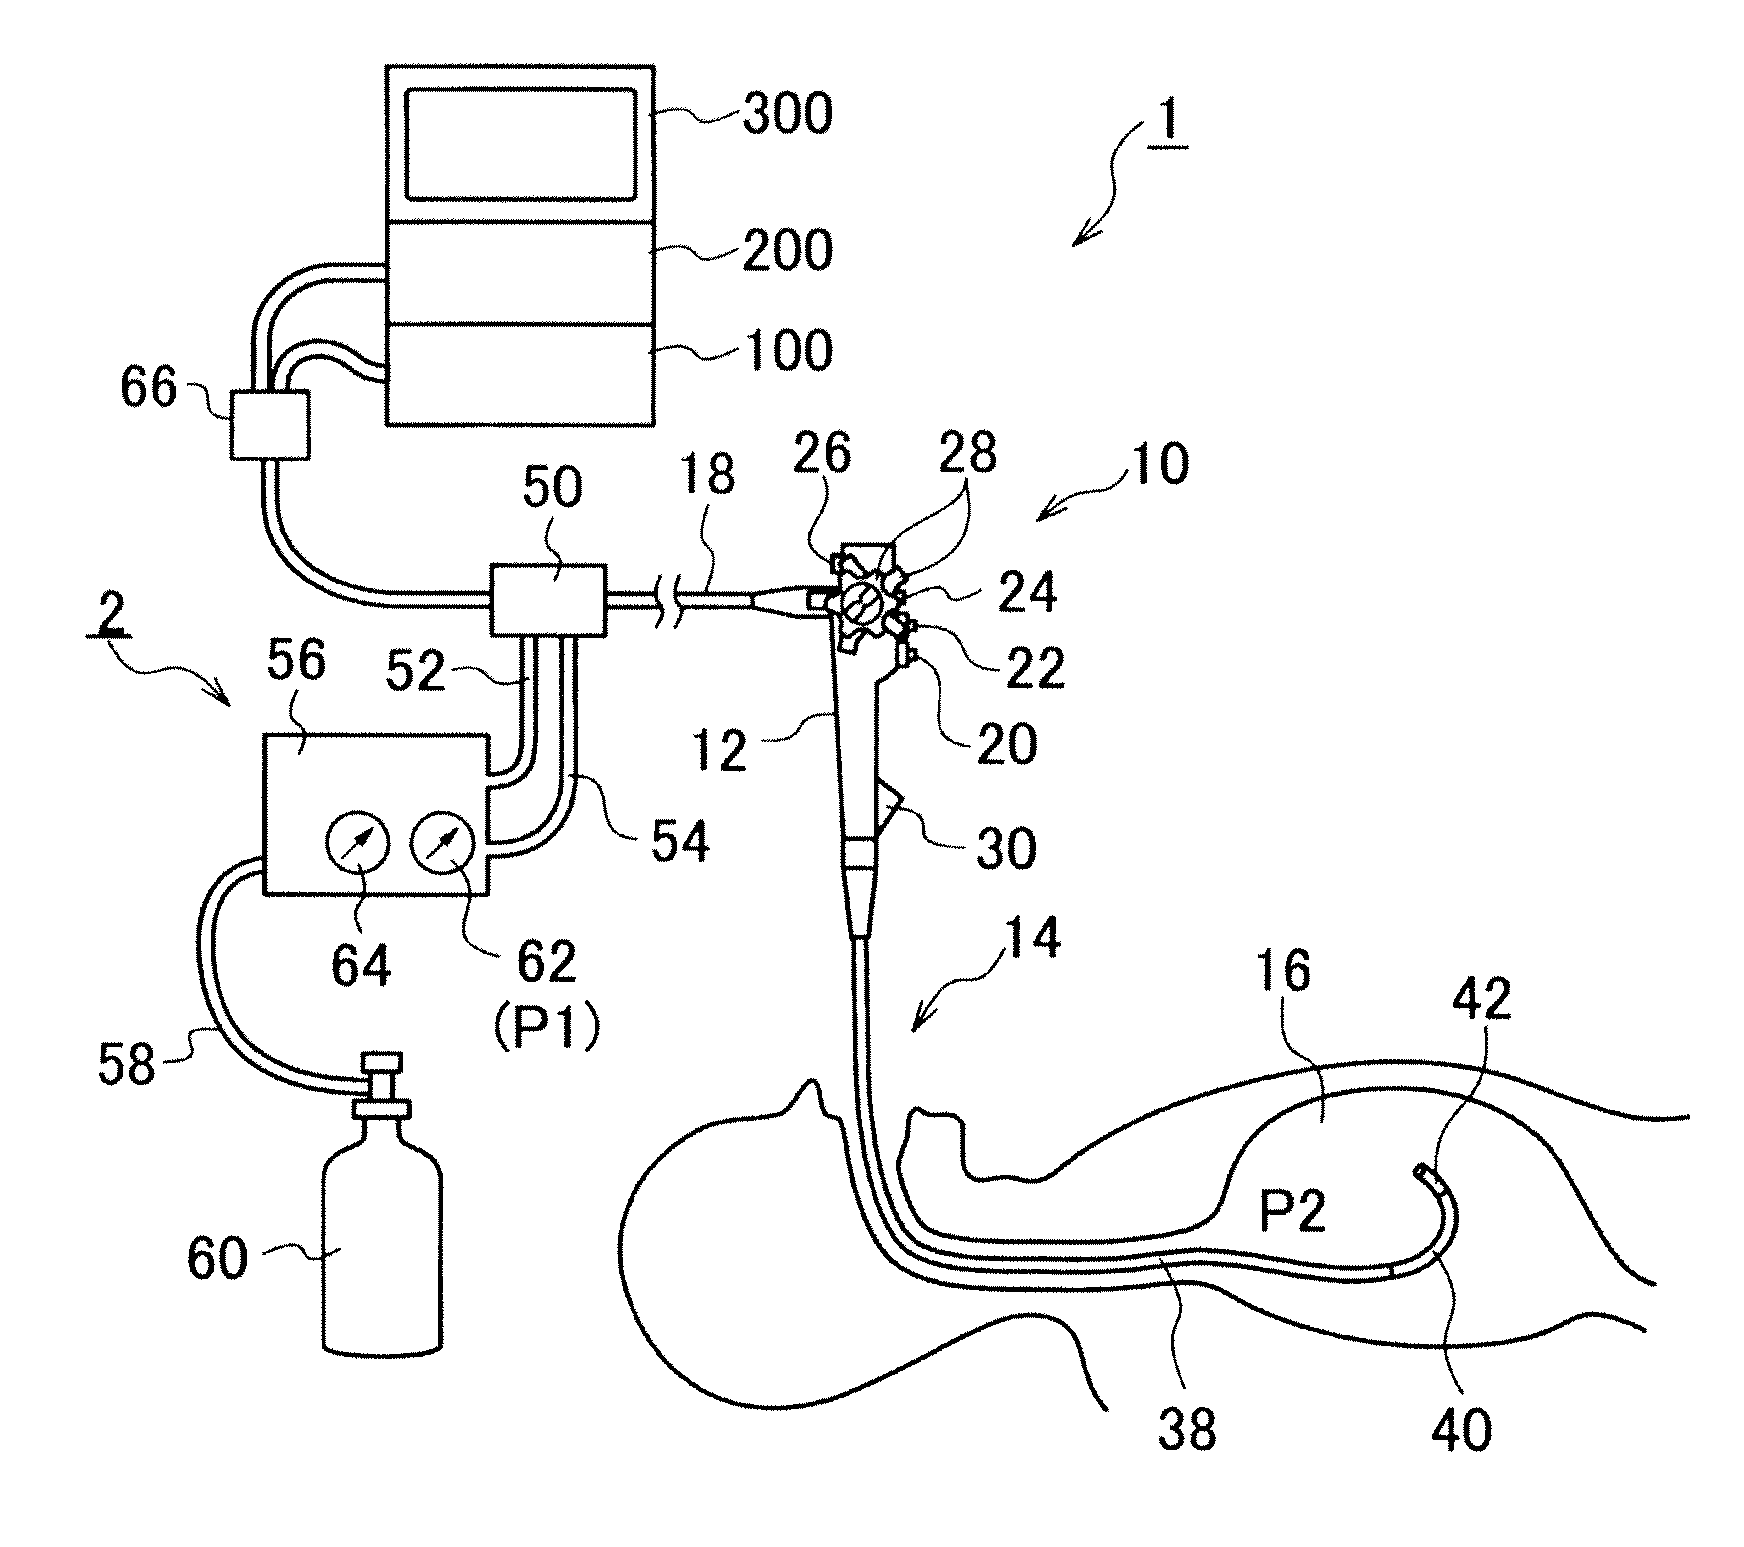 Endoscope air-supply system